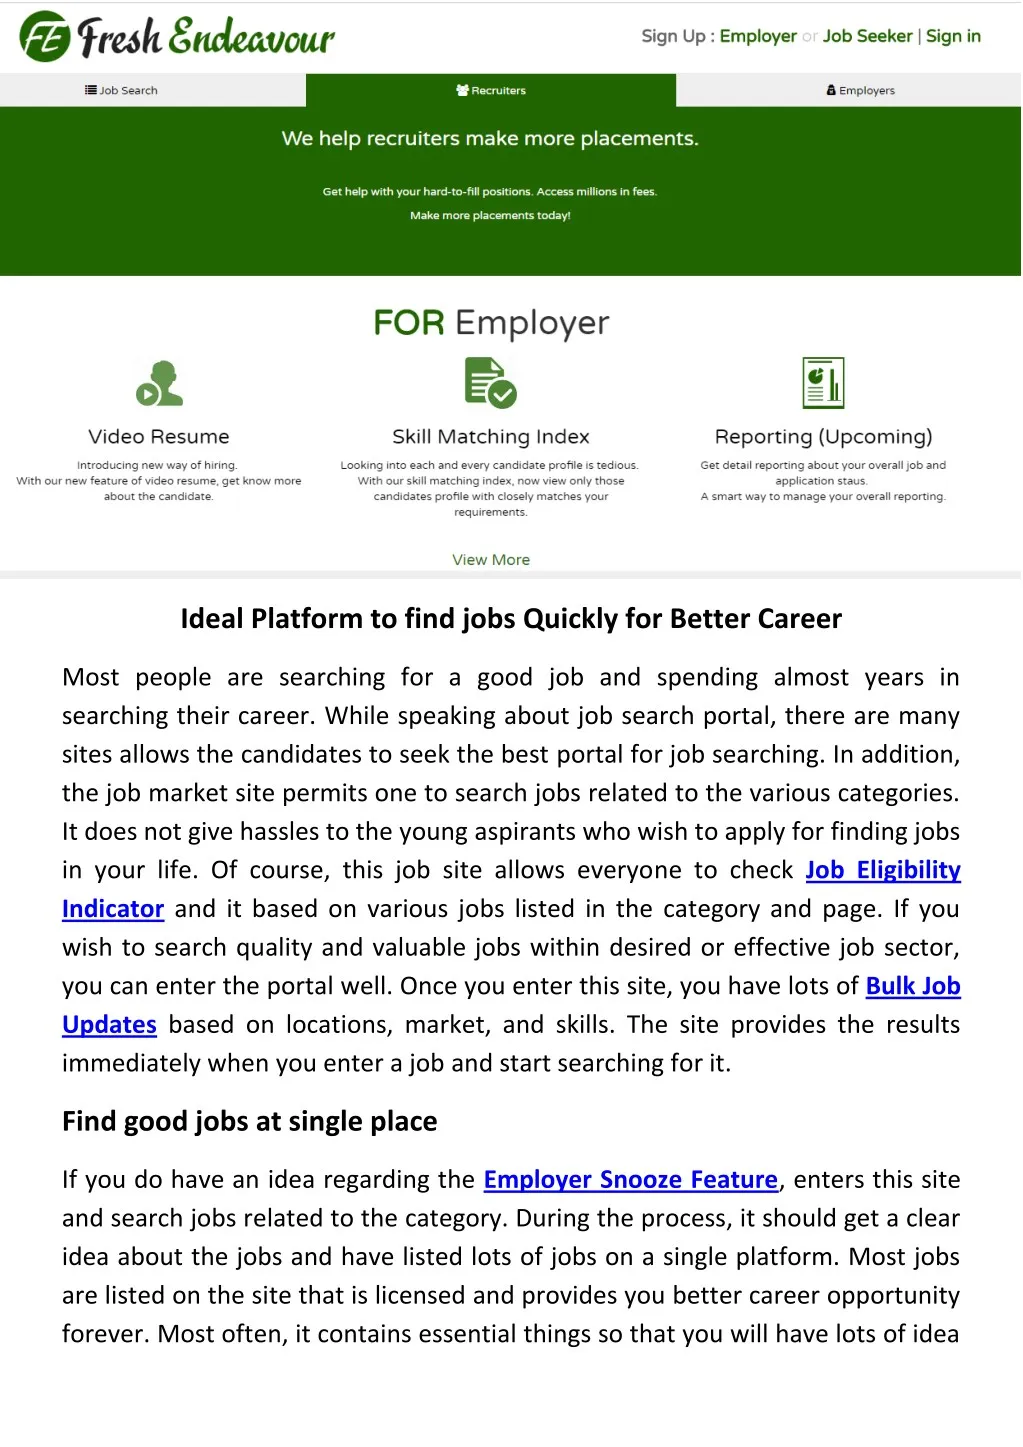 ideal platform to find jobs quickly for better